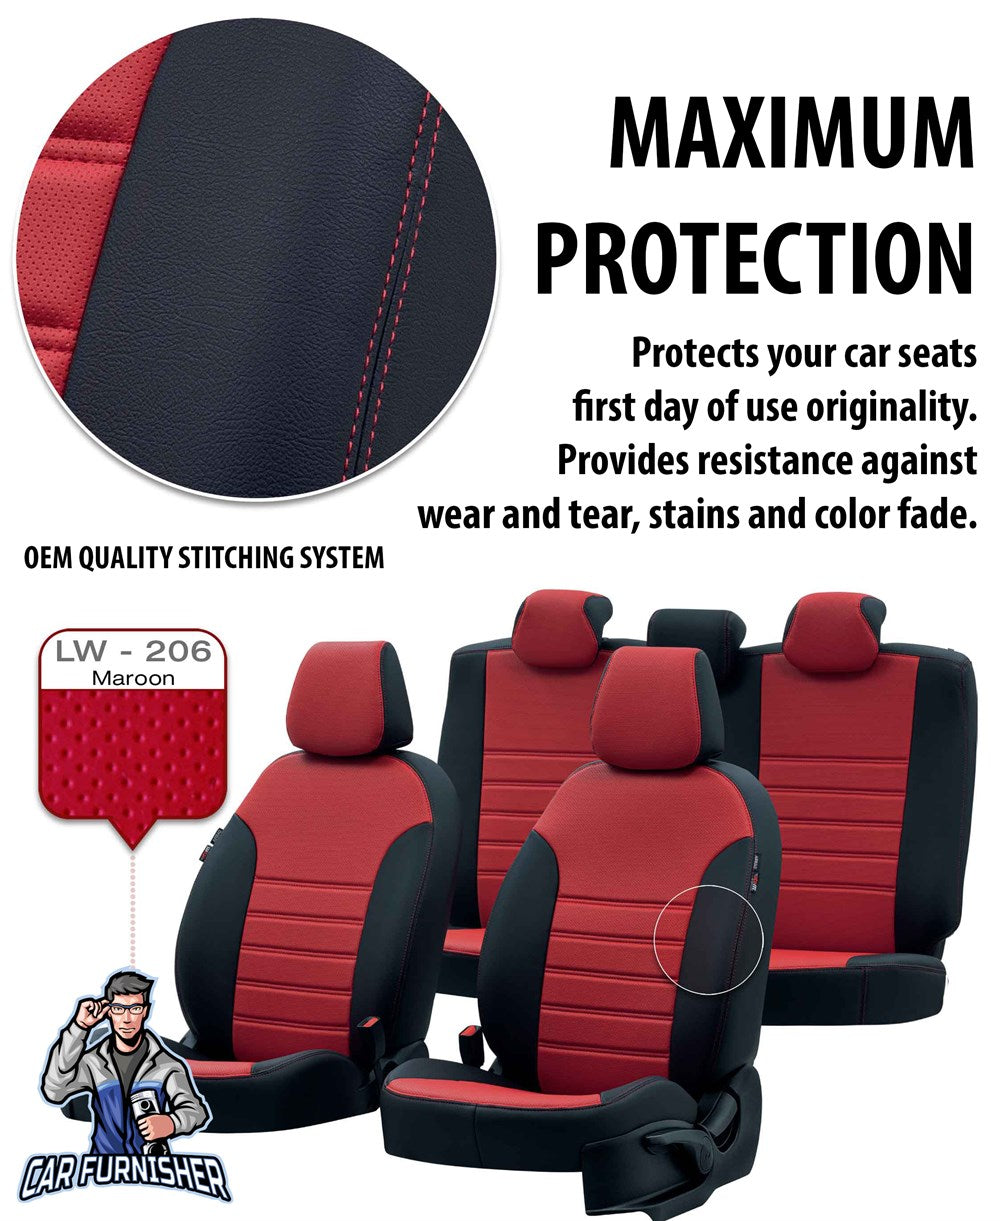 Volkswagen Caravelle Seat Cover Istanbul Leather Design Burgundy Leather